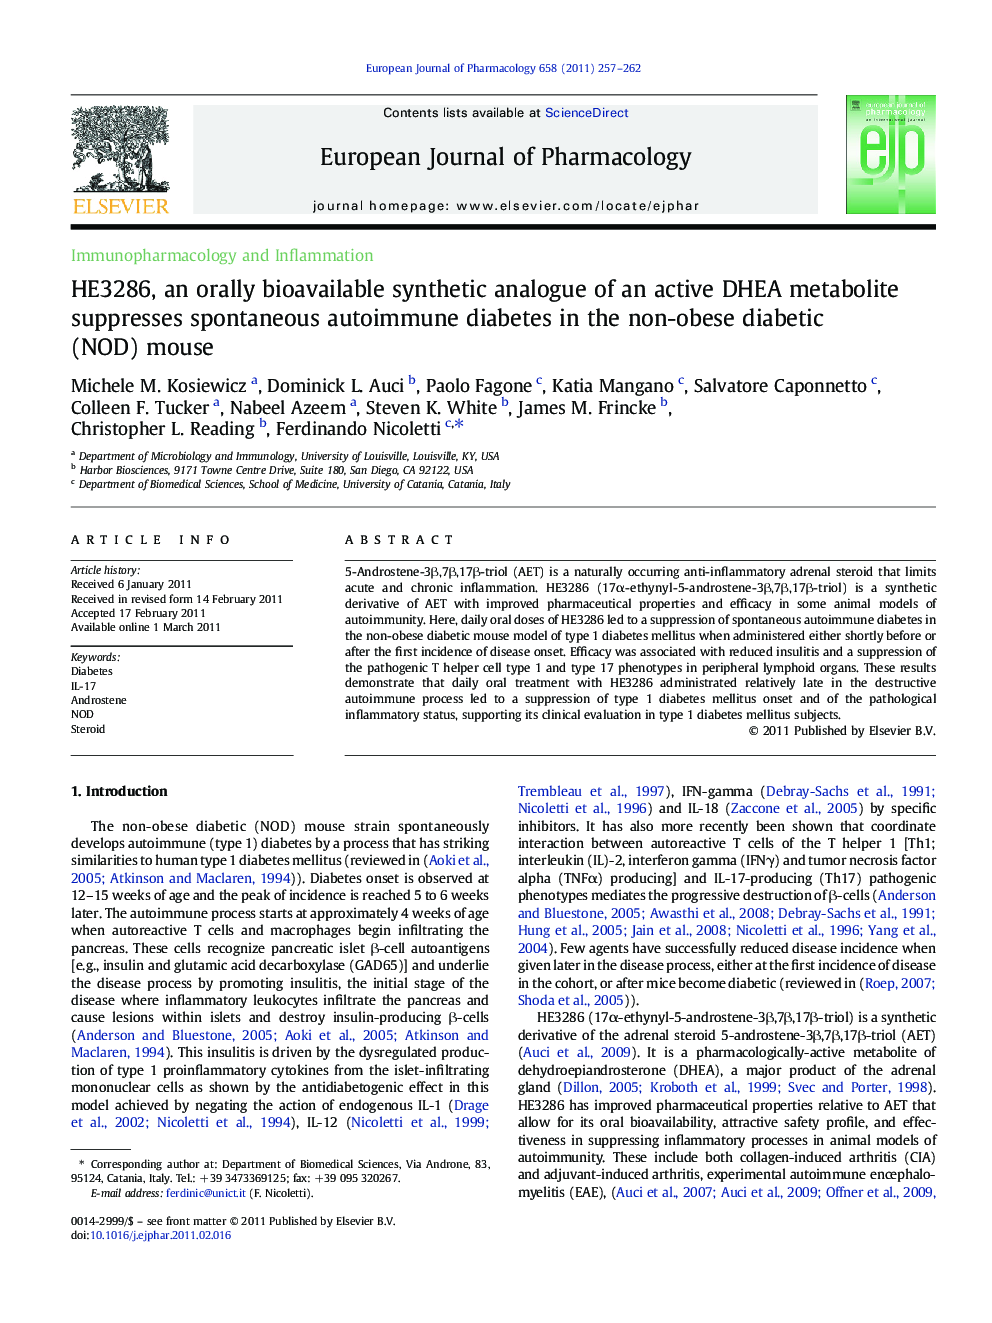 HE3286, an orally bioavailable synthetic analogue of an active DHEA metabolite suppresses spontaneous autoimmune diabetes in the non-obese diabetic (NOD) mouse